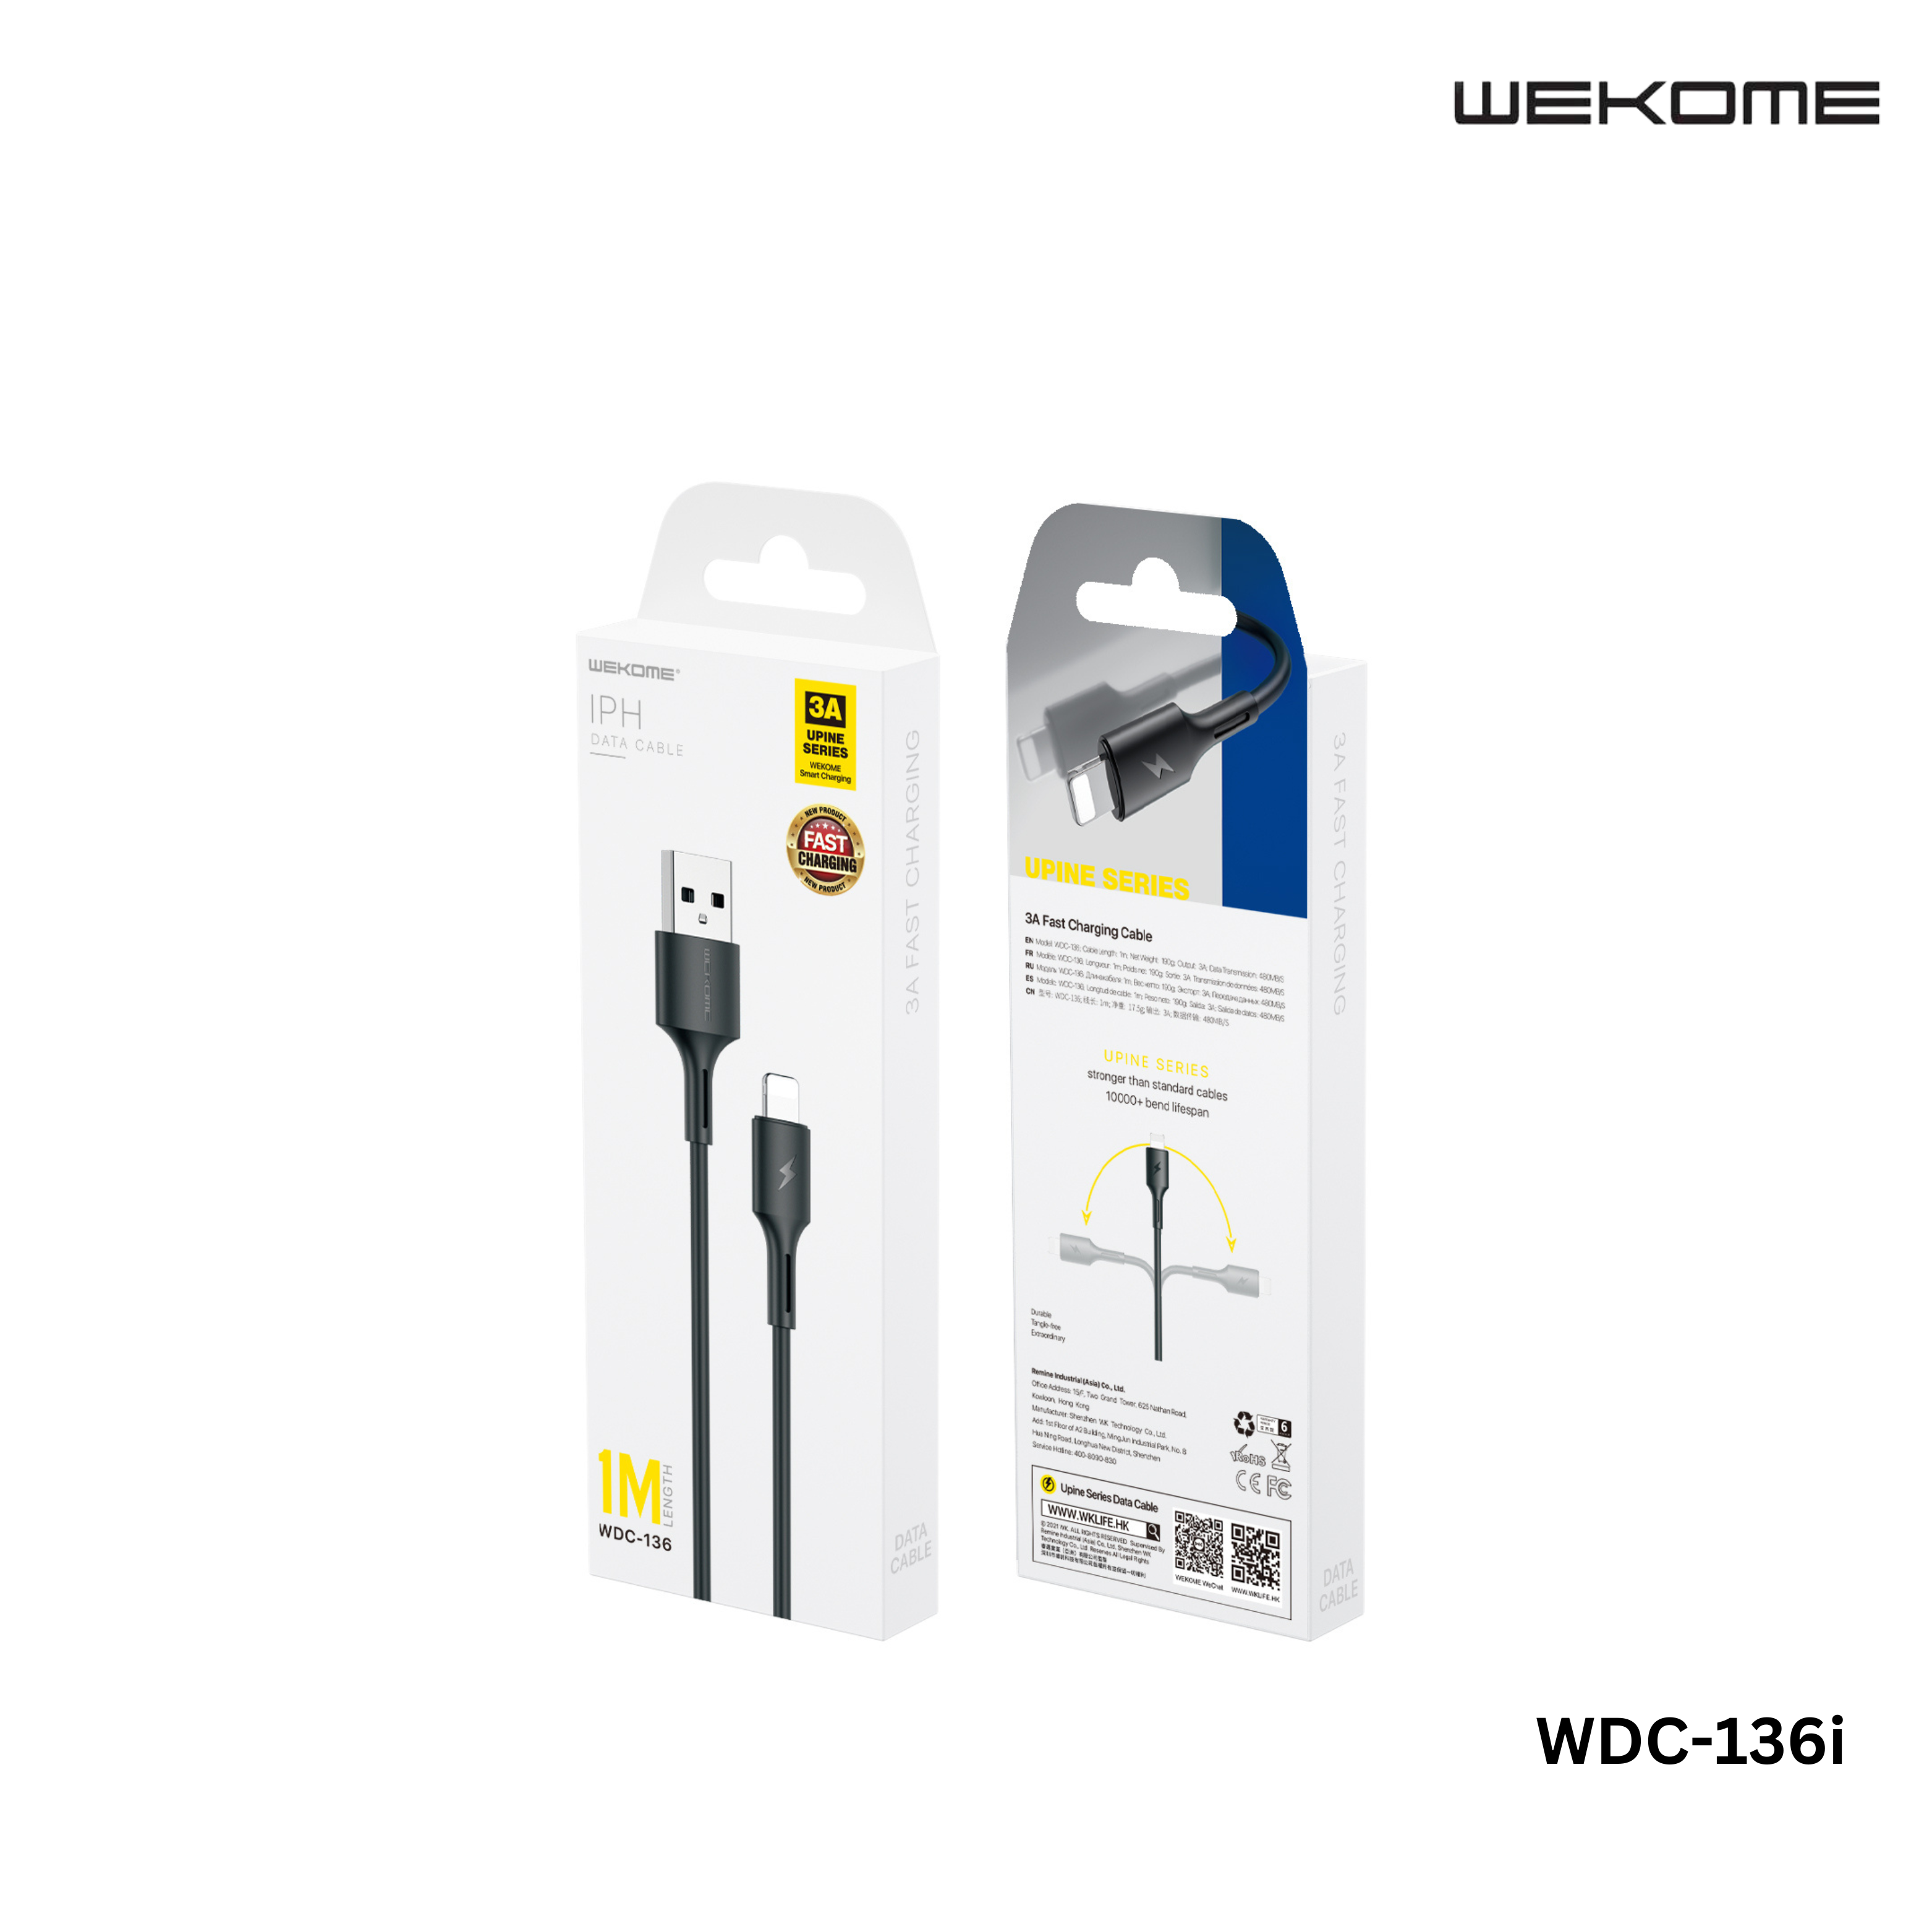 WEKOME Lightning Cable WDC-136I UPINE/YOUPIN SERIES 3A DATA CABLE FOR IPH, iPhone Cable, Lighting Cable, iPhone Charging Cable-White